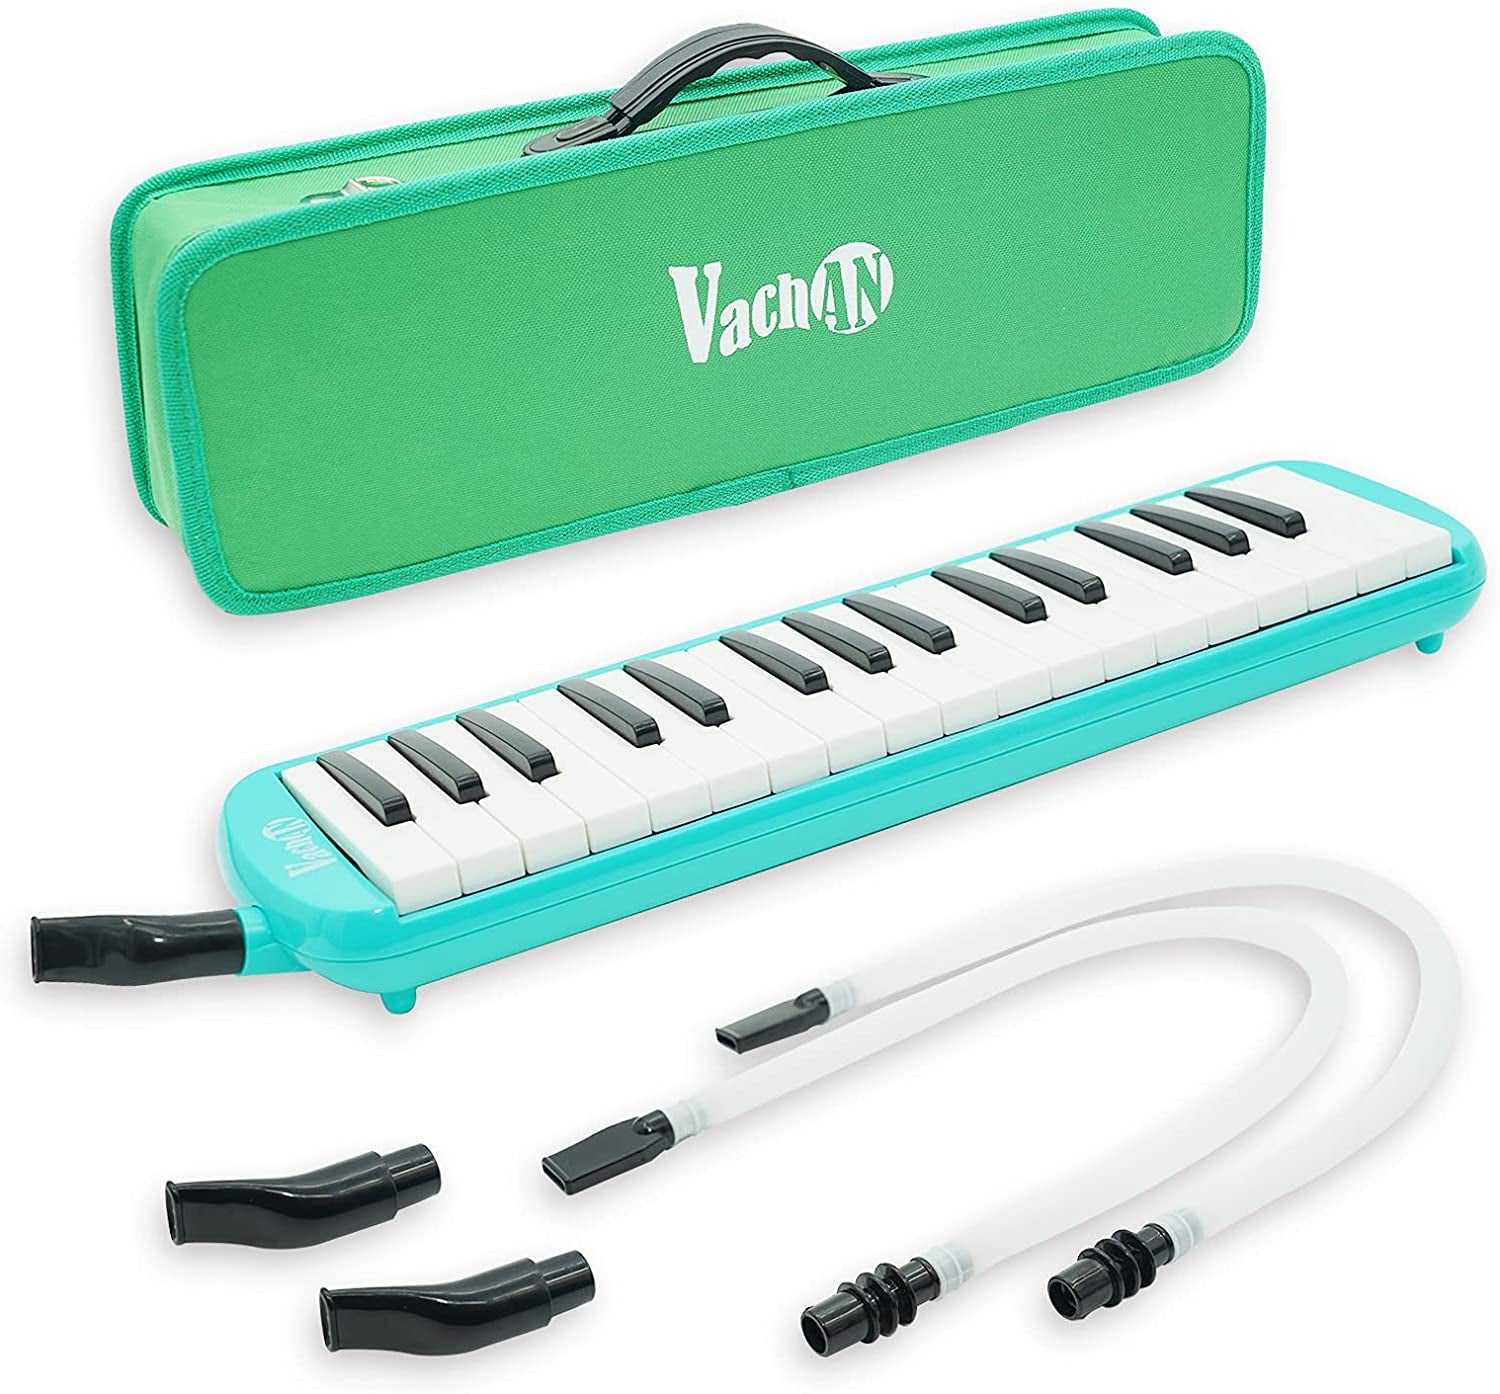 37 Keys Melodica Air Piano Instrument with 2 Soft Long Tubes, Short Mouthpieces, and Carrying Bag for Kids Beginners 